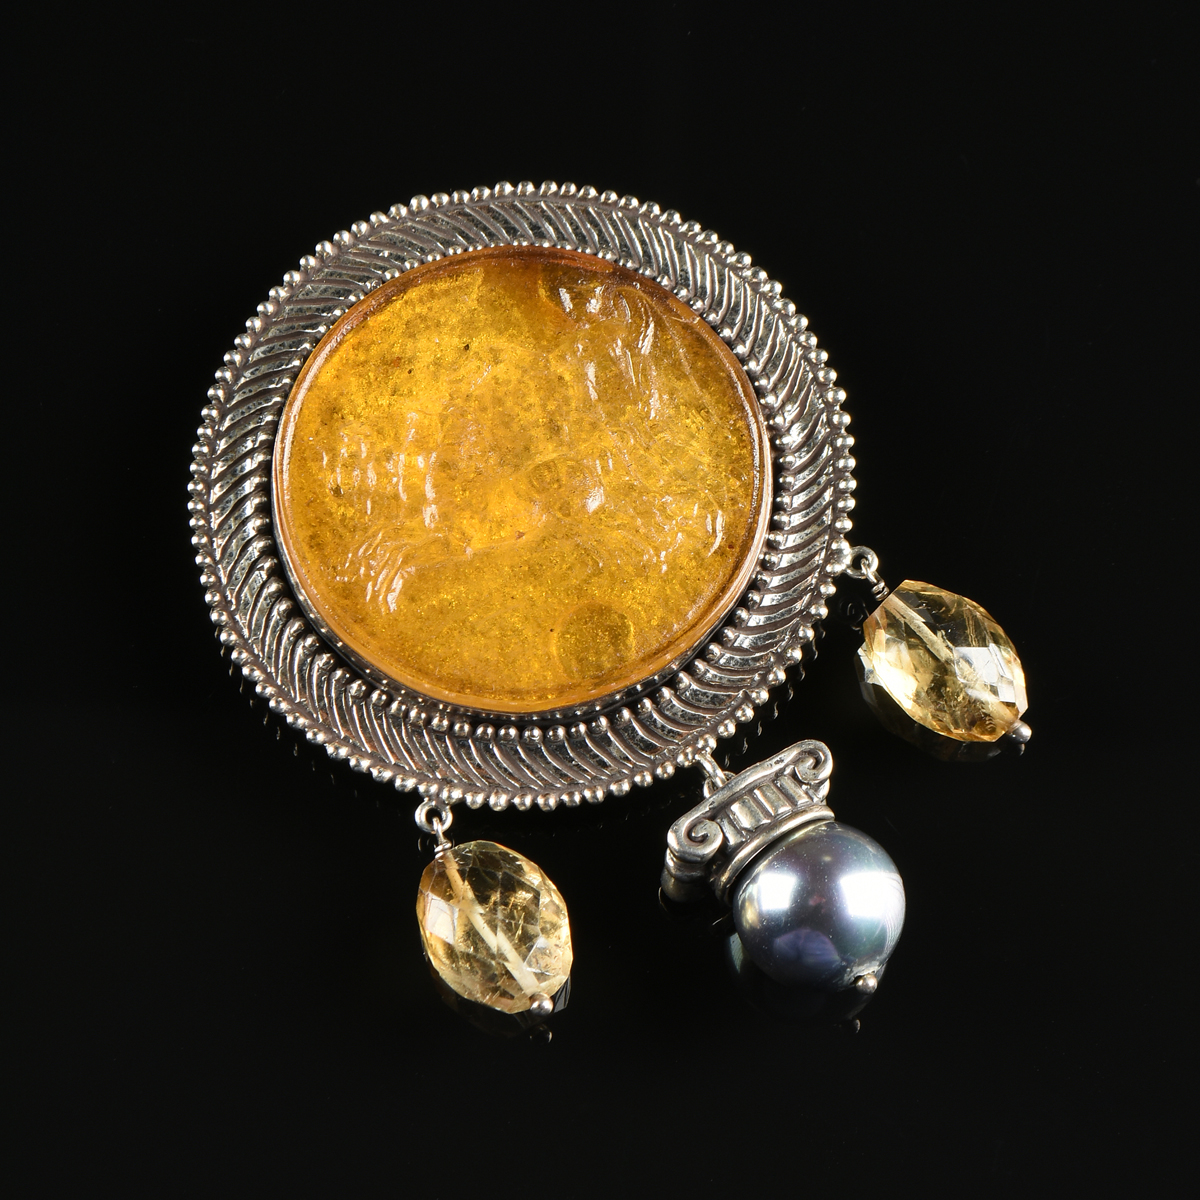 AN AD MAIOREM DEI GLORIAM STERLING SILVER BROOCH BY REBECCA COLLINS, the gadrooned and beaded